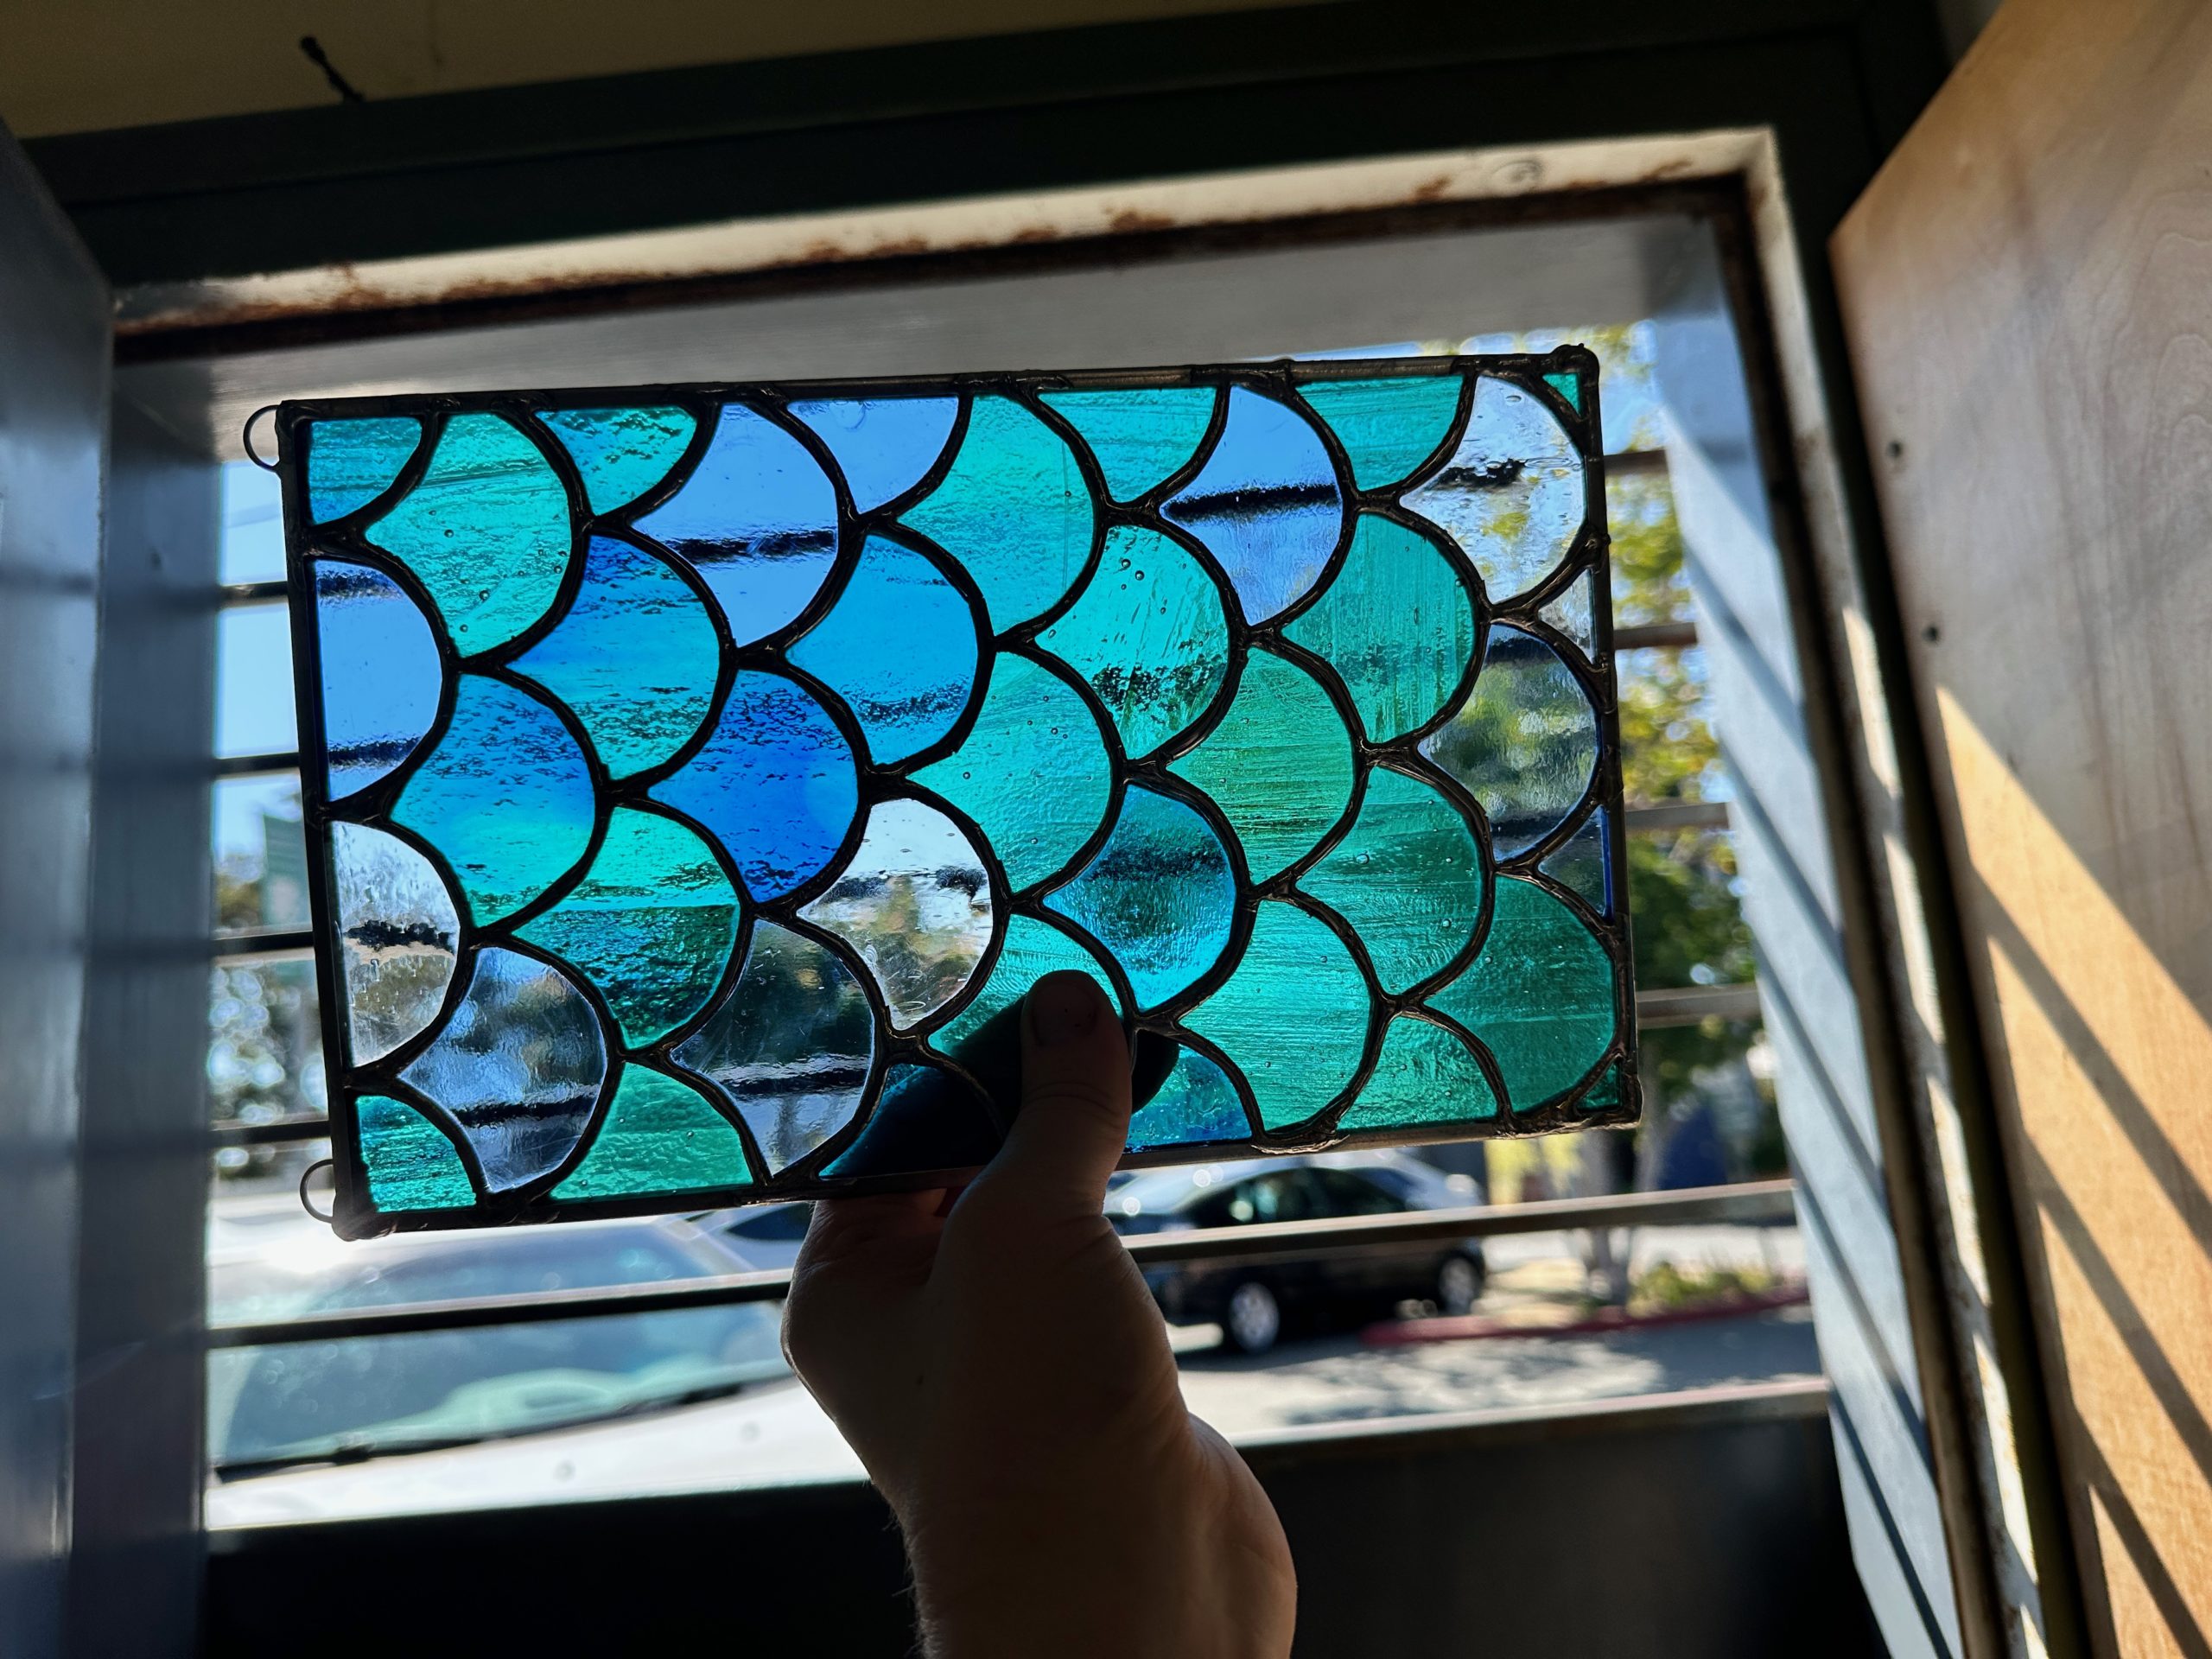 A stained glass piece with a fish-scale pattern in blues and greens, held up to the light by a white person's hand